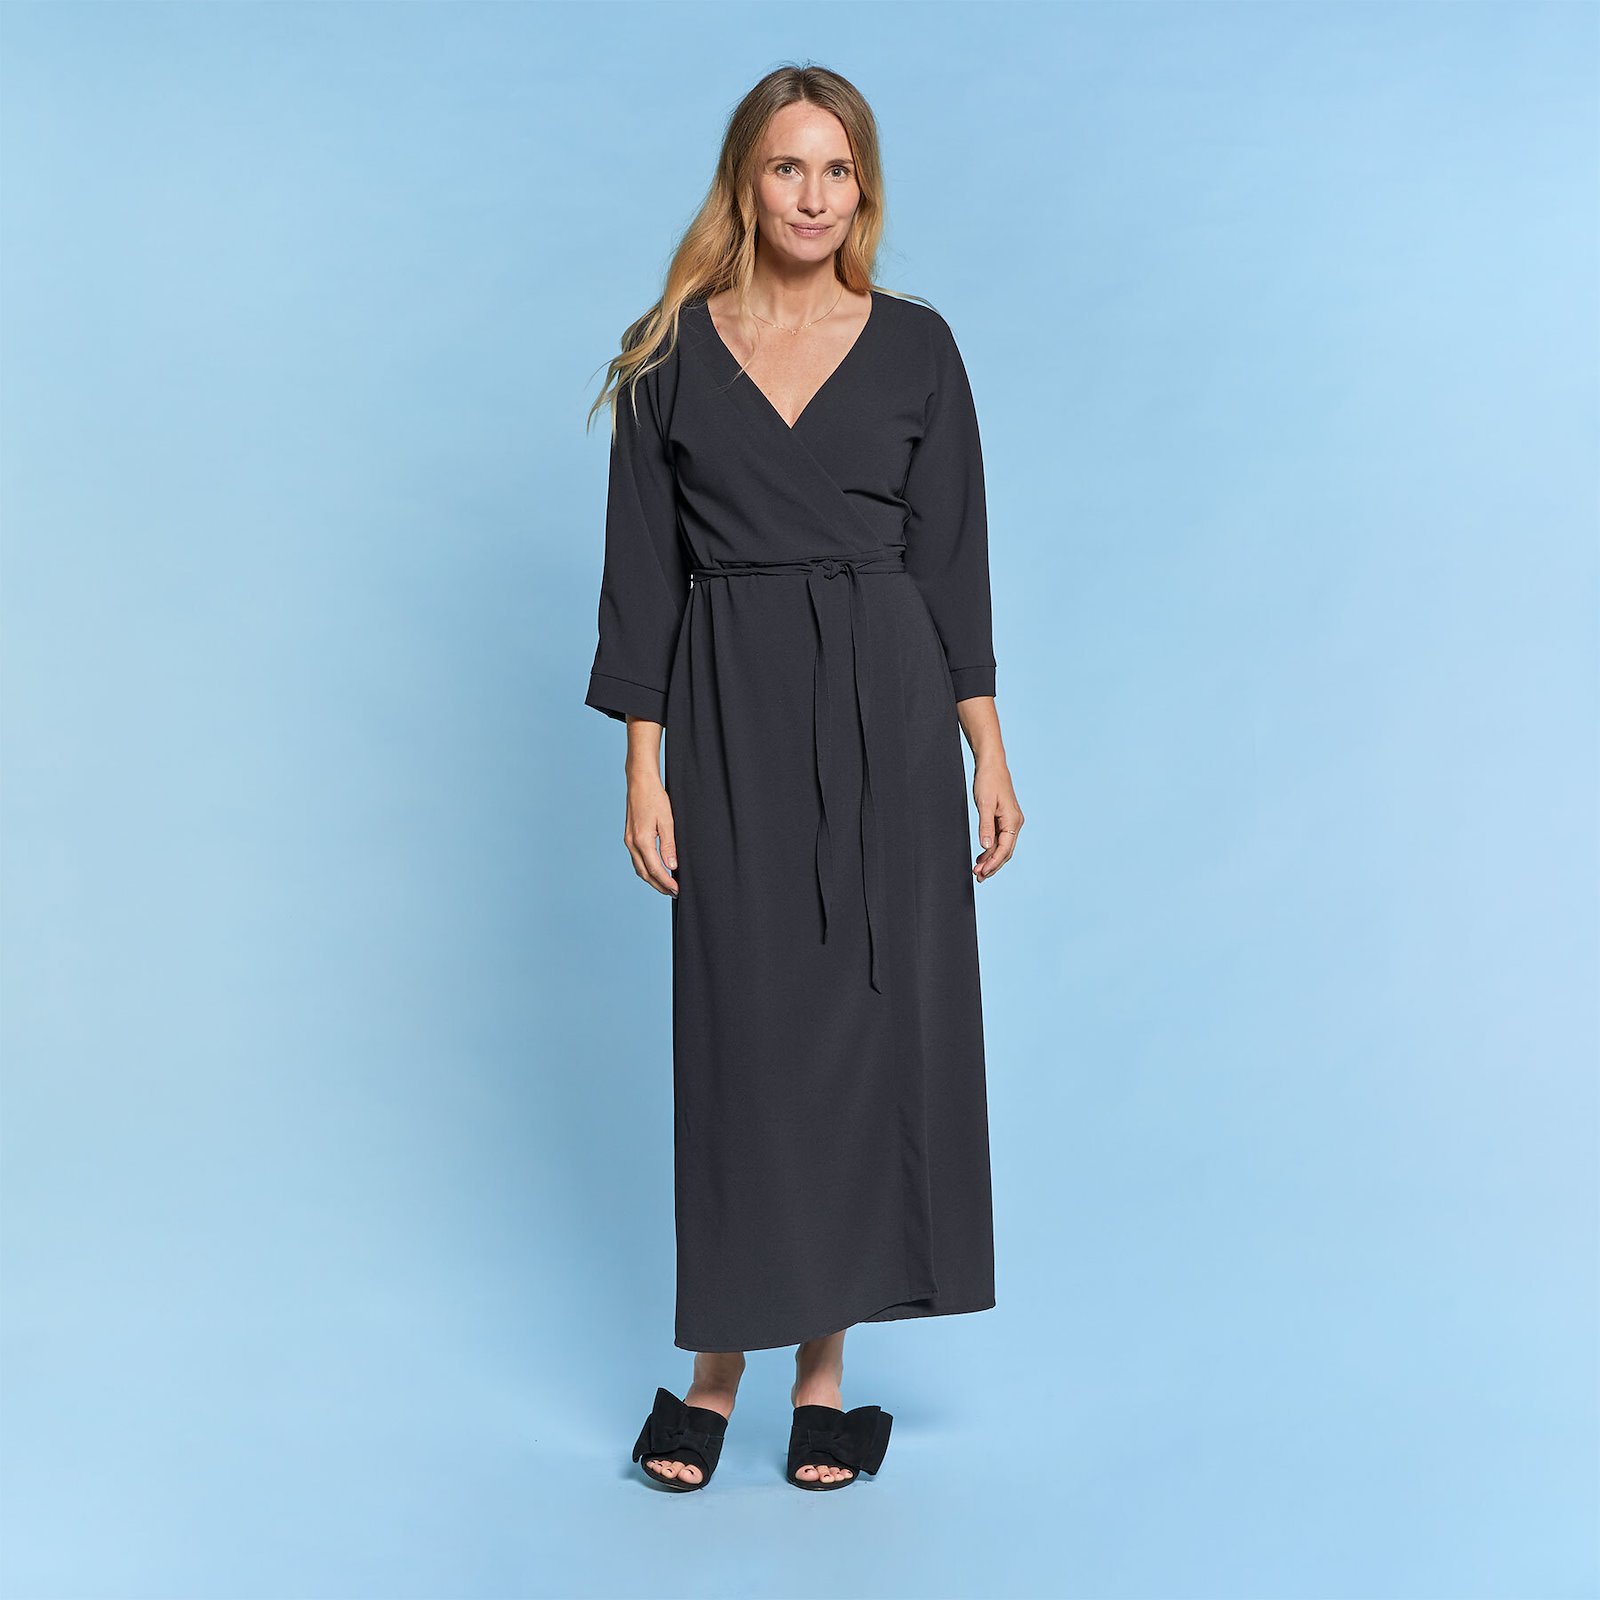 Wrap dress with batwing sleeves, 40/12 p23162000_p23162001_p23162002_p23162003_p23162004_pack_d